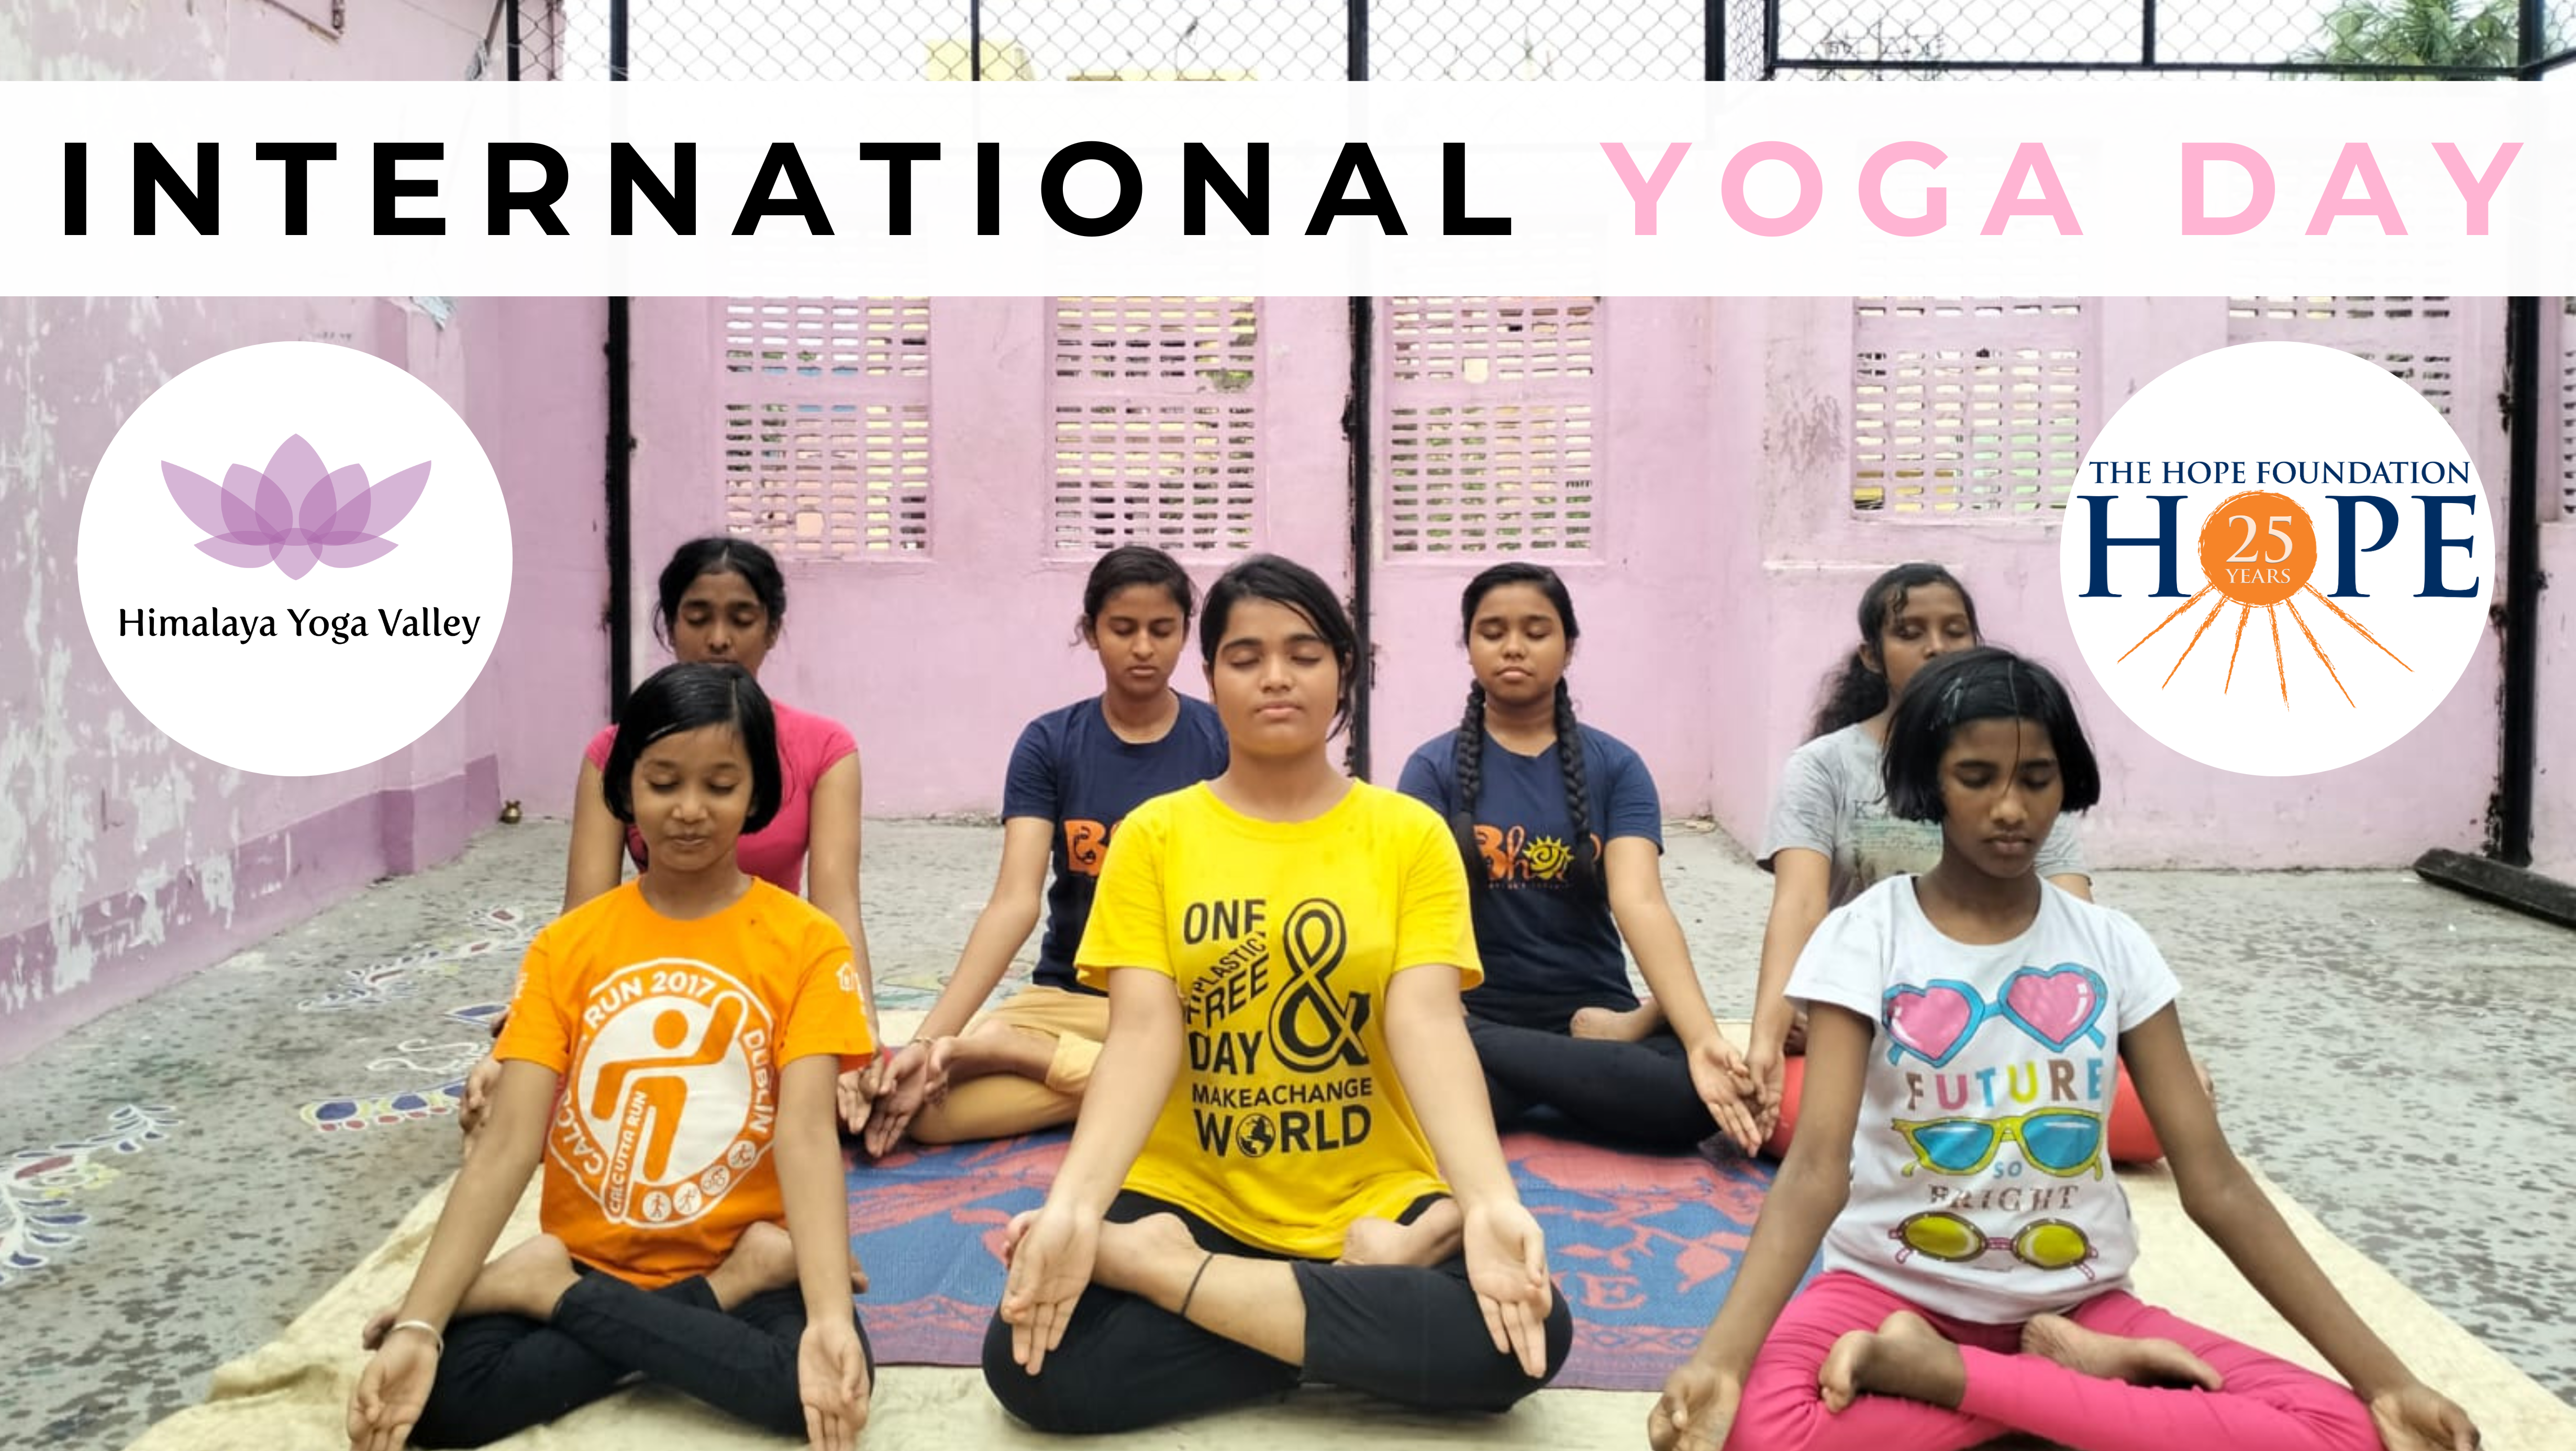 International Yoga Day supporting The Hope Foundation